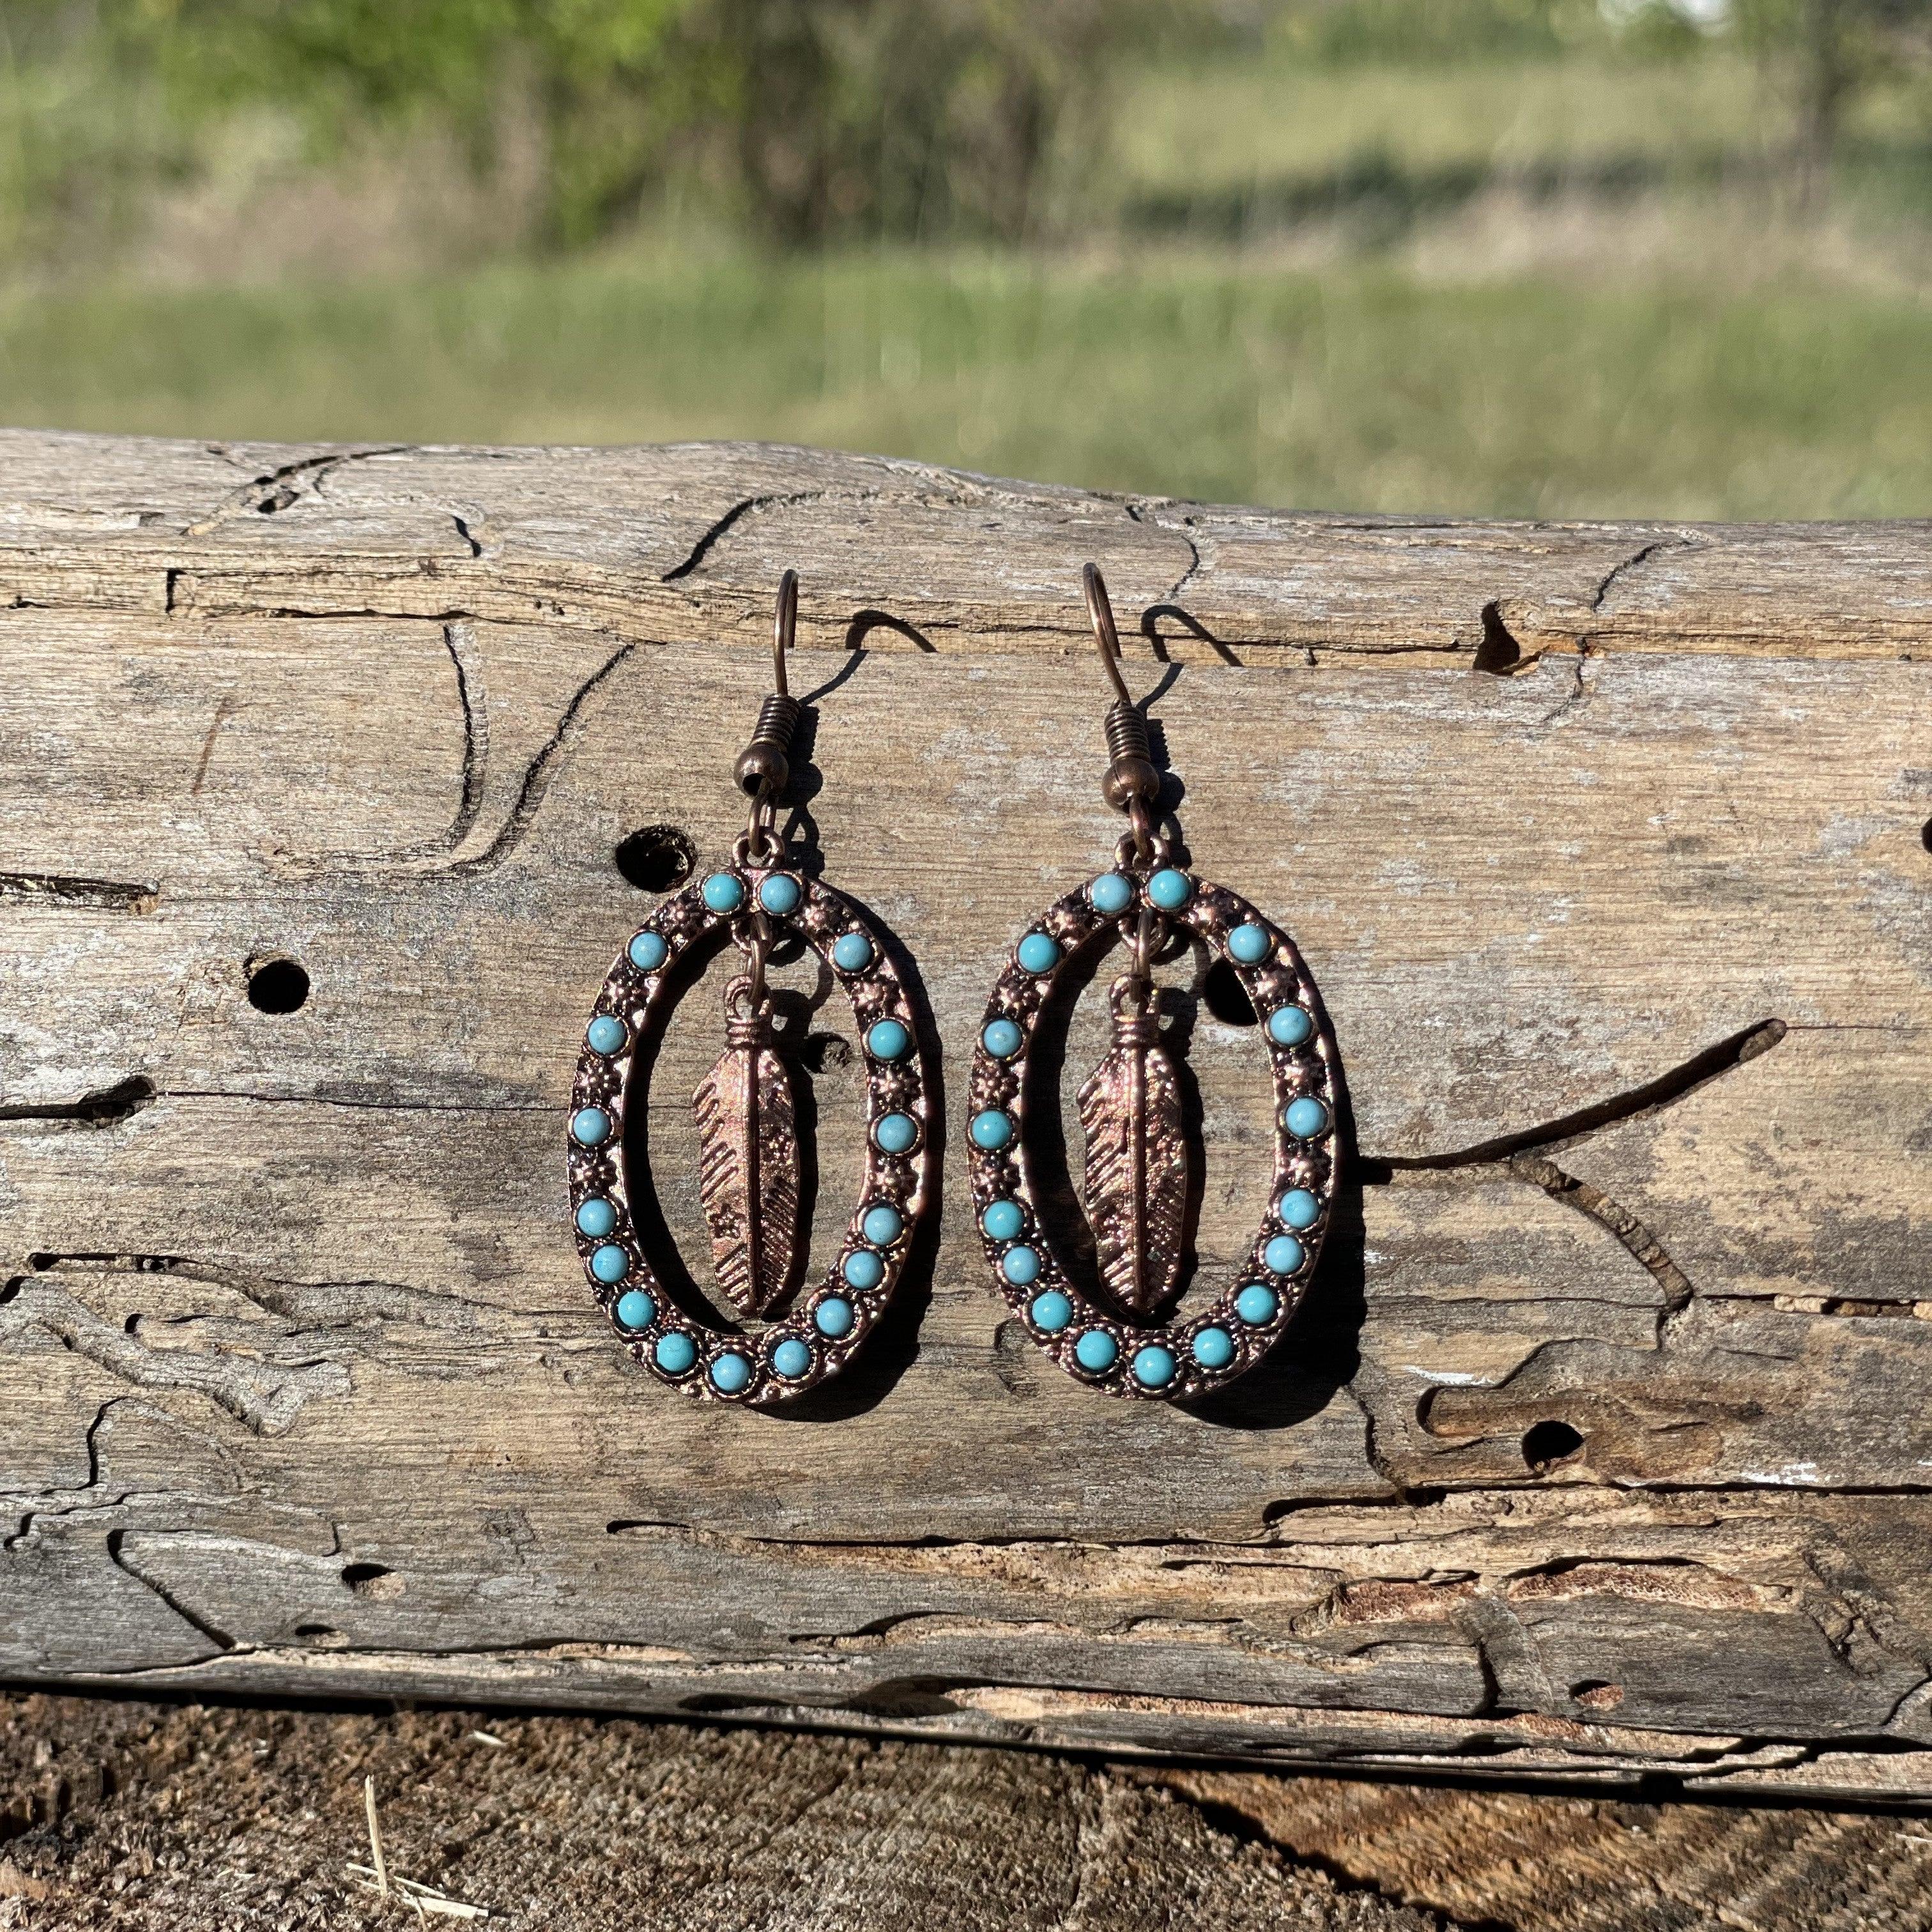 Feather and Turquoise Dangling Copper Fashion Earrings WA175 - RODEO DRIVE